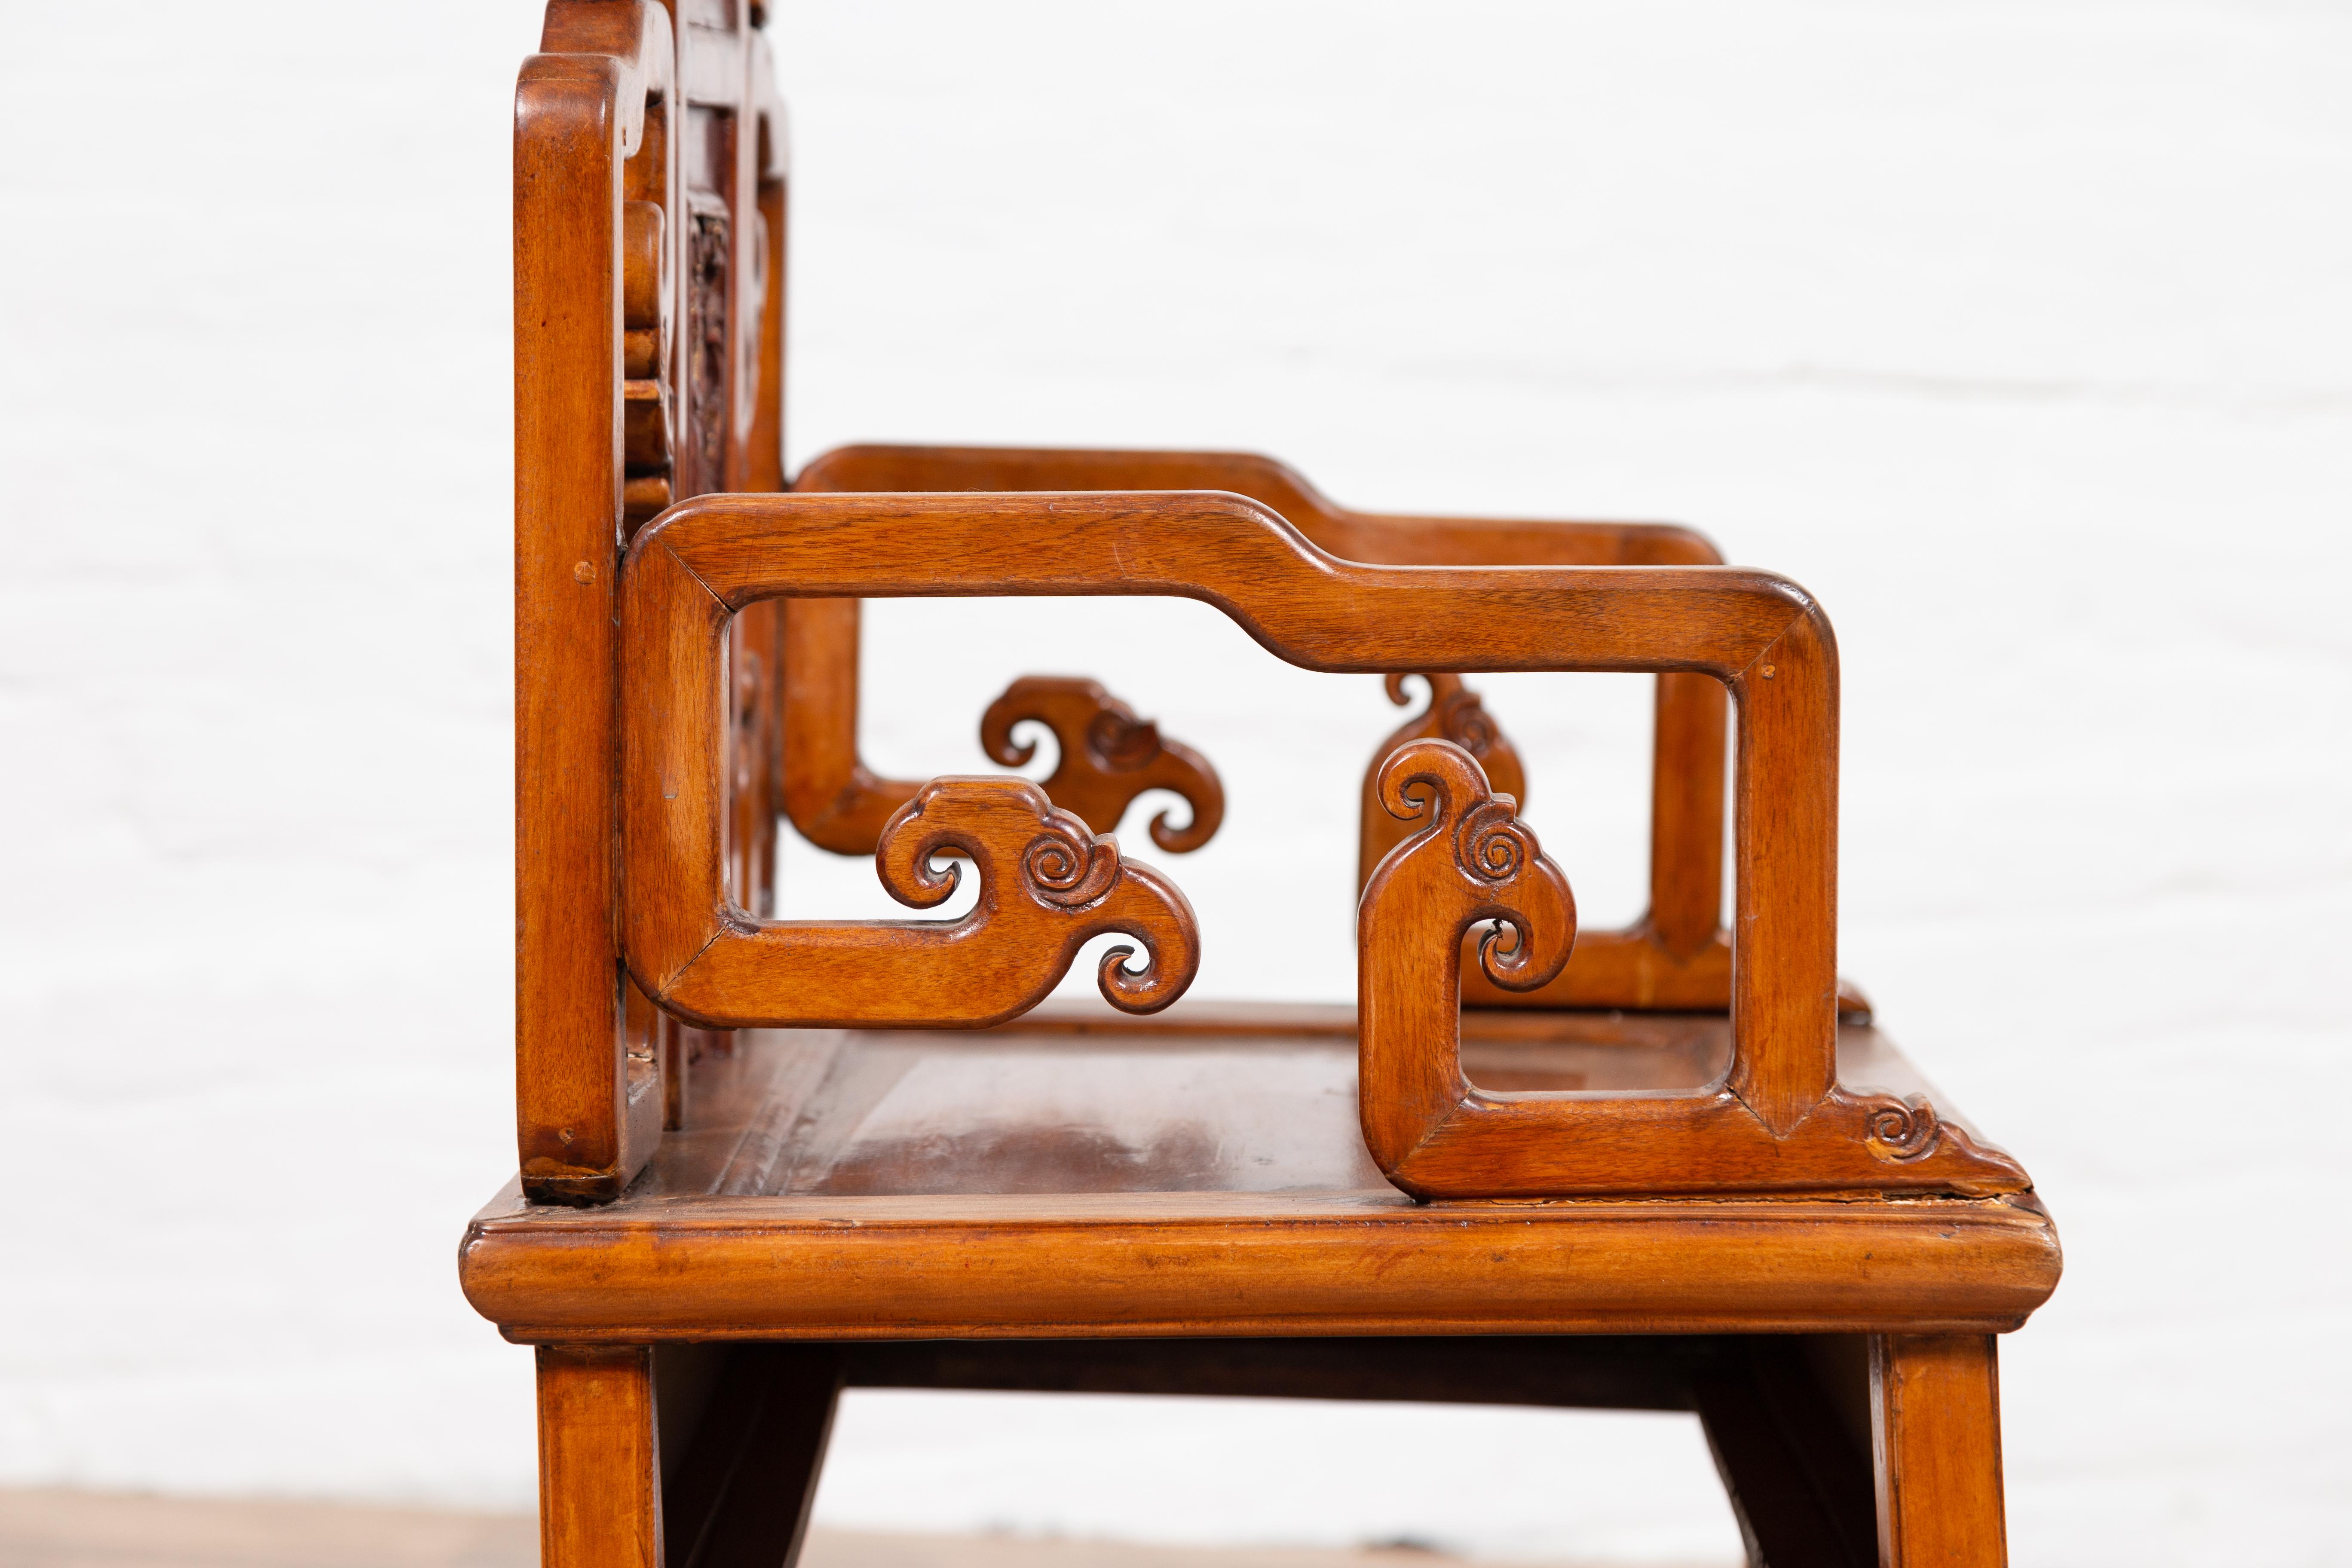 Hand Carved Antique Chinese Chair with Natural Wood Patina and Scroll Décor 4